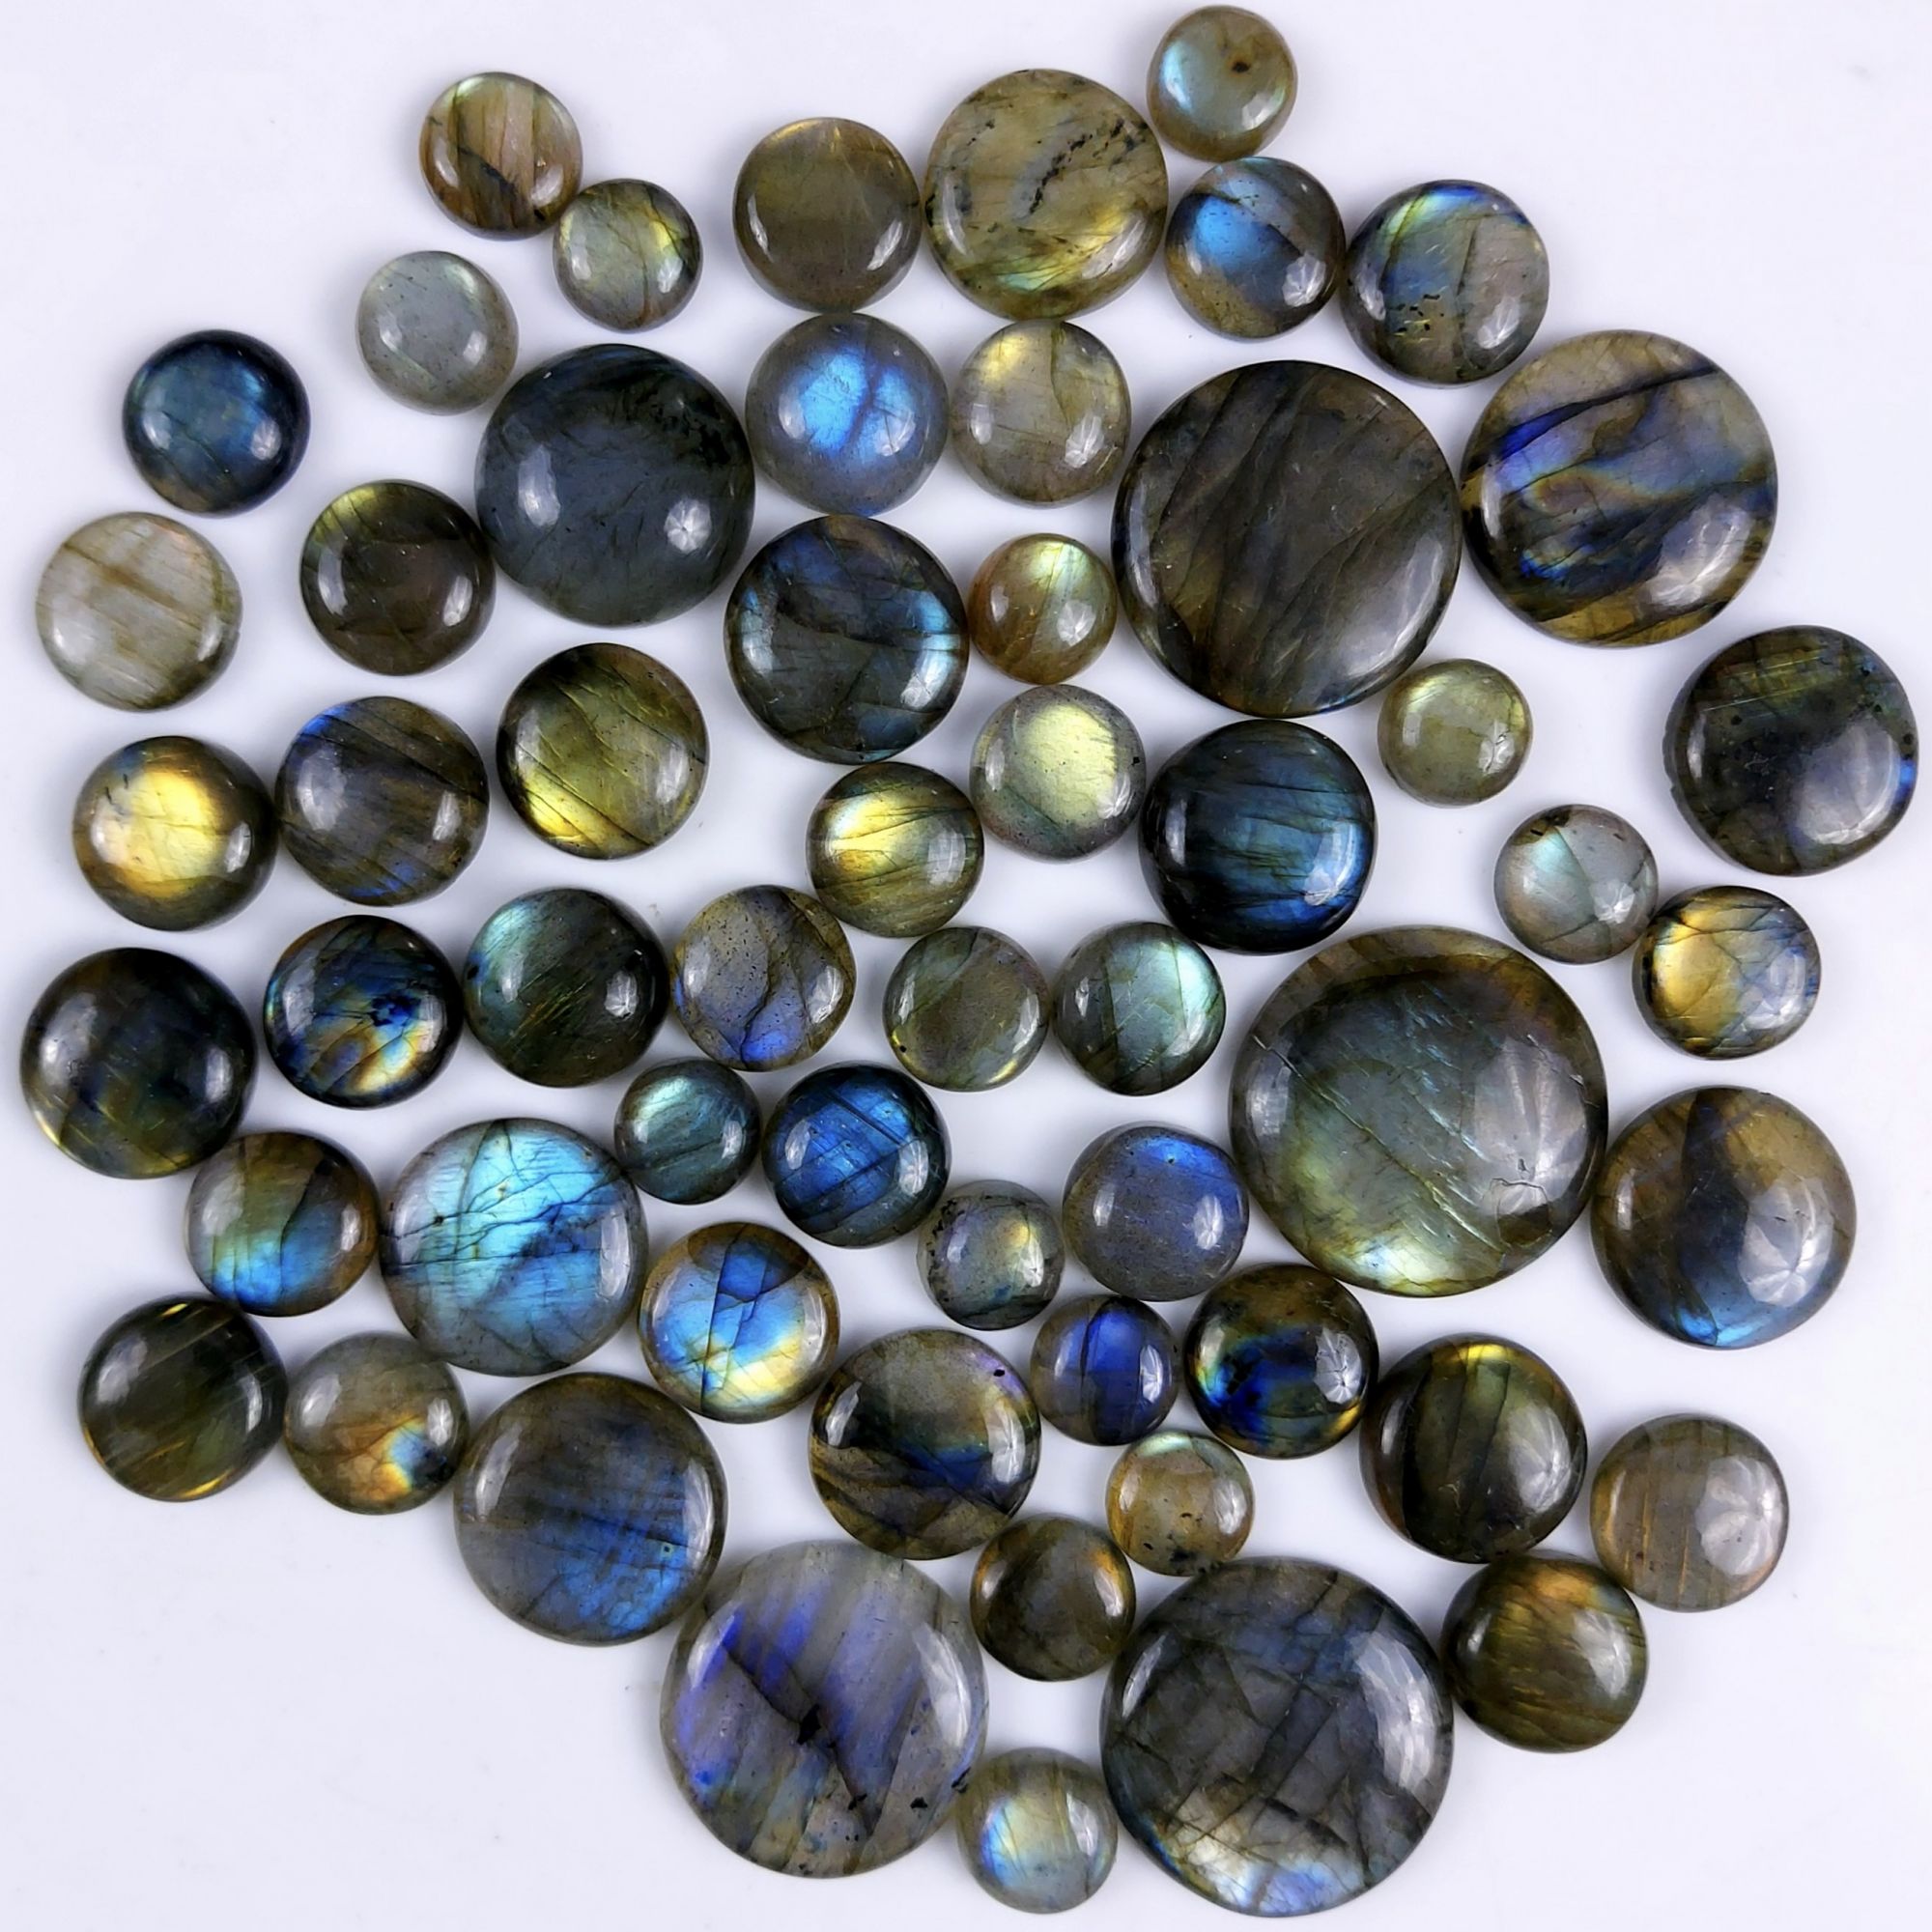 57Pcs 618Cts  Natural Labradorite Round Cabochon Multifire Labradorite Gemstone For Jewelry Making Loose Gemstone Cabochon For Crystal Energy Gift For Her #G-268